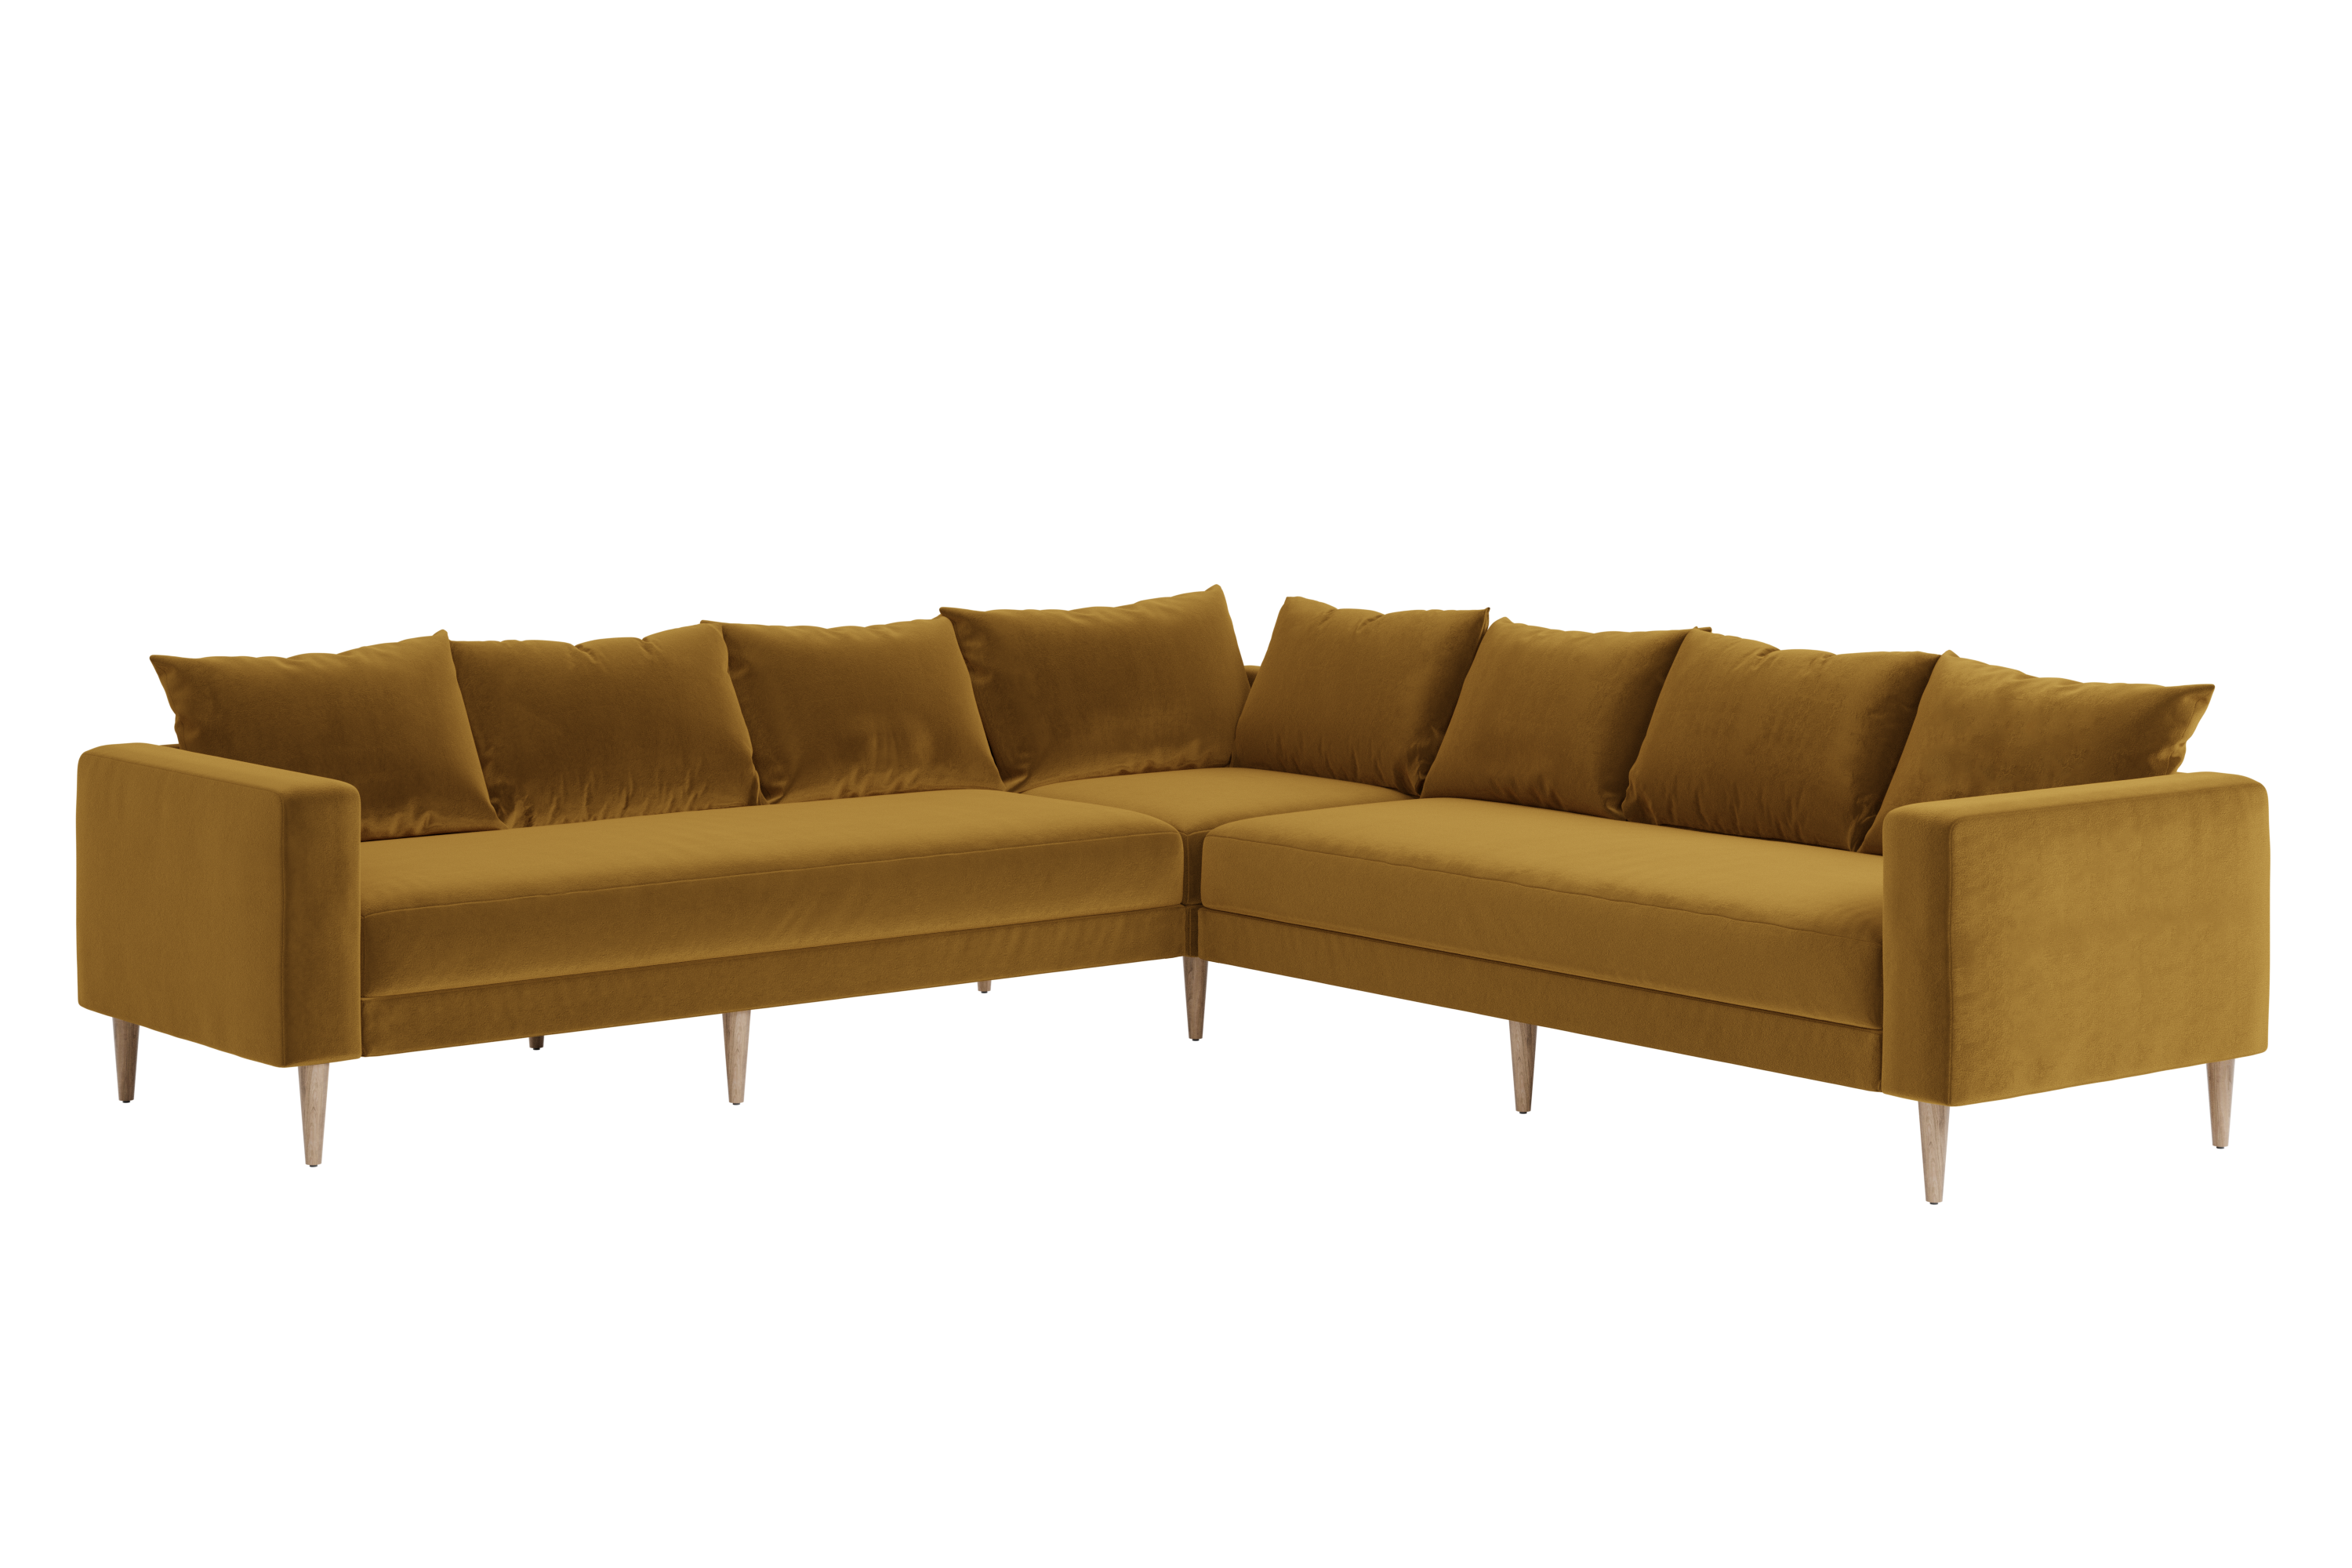 The Essential Corner Sectional (7 Seat) in Recycled Velvet